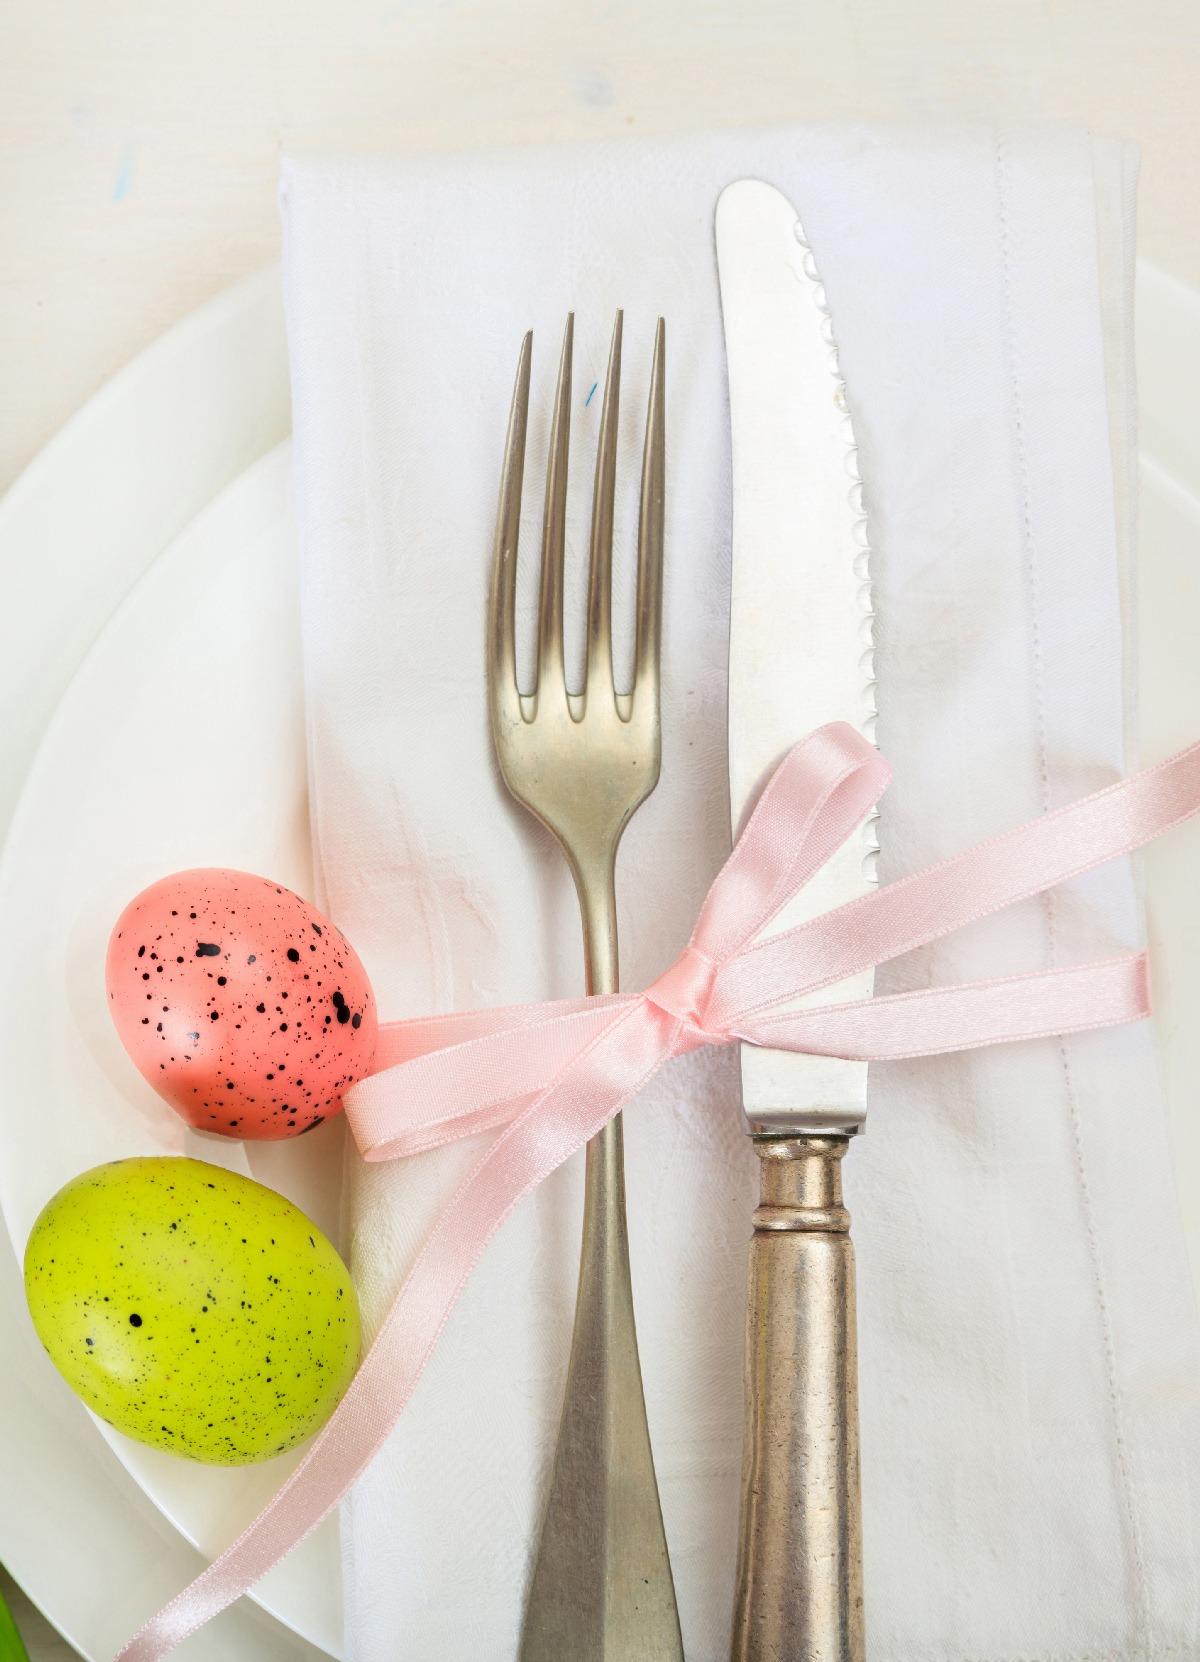 Elegant table setting with cutlery, napkin, ribbon, and colorful Easter eggs.